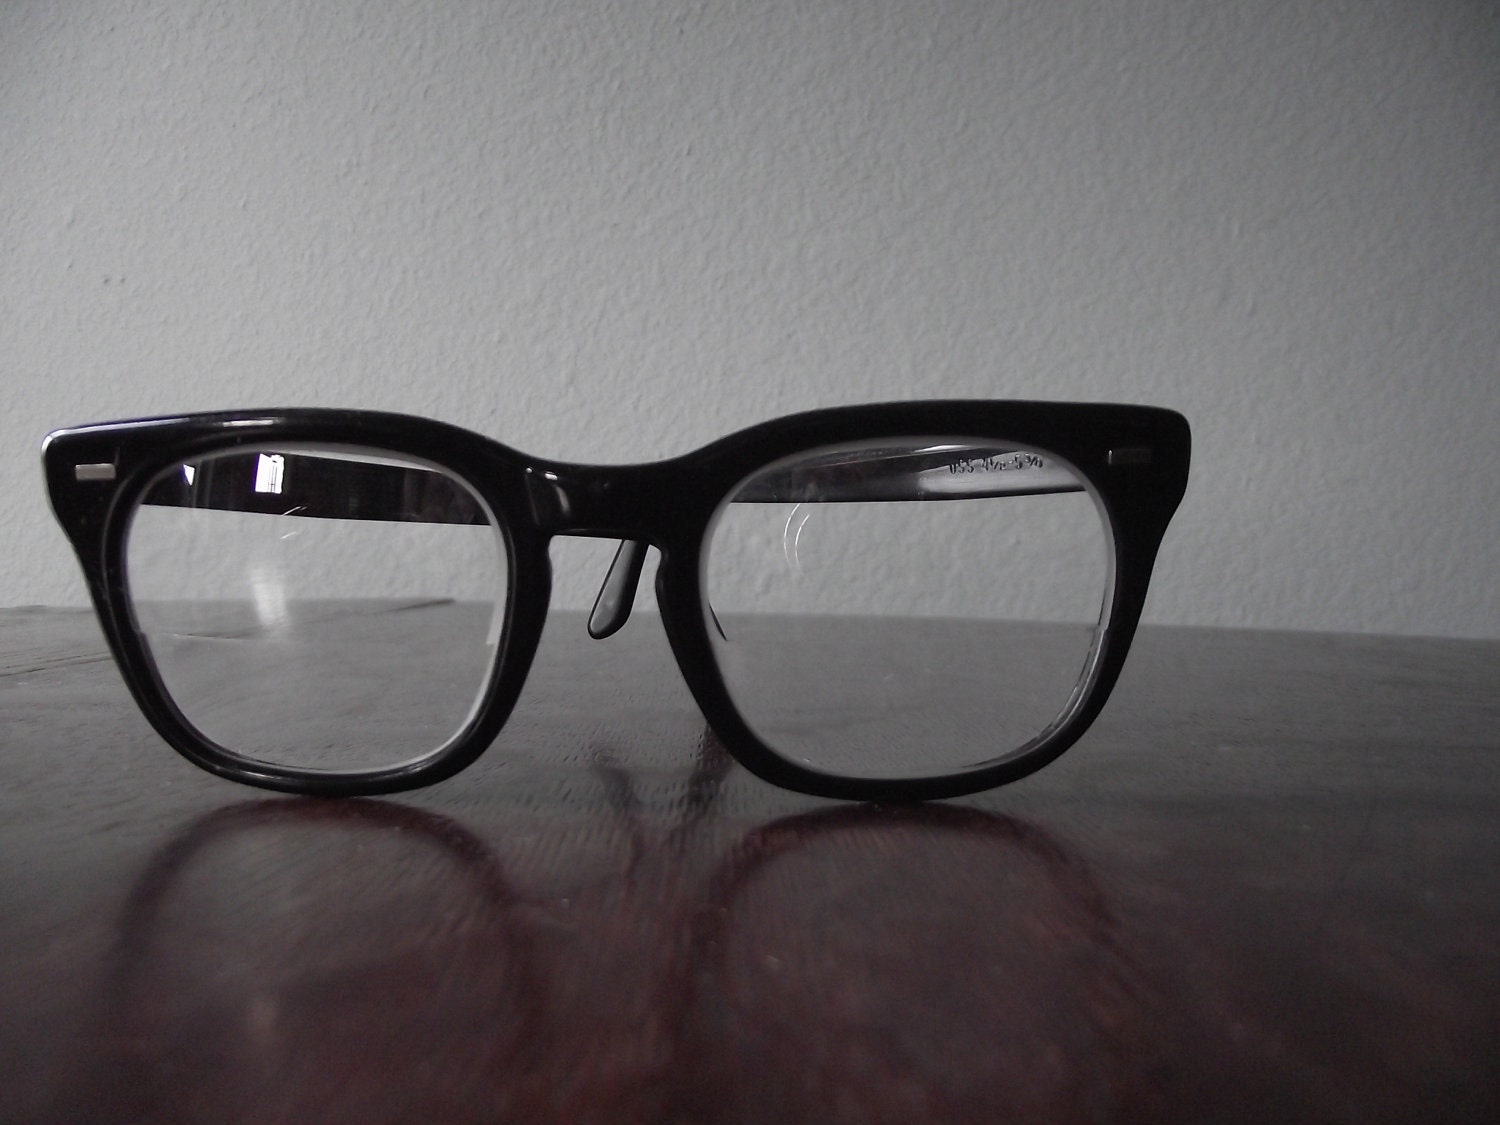 Vintage Geeky Eyeglasses Army Issue Buddy Holly Style